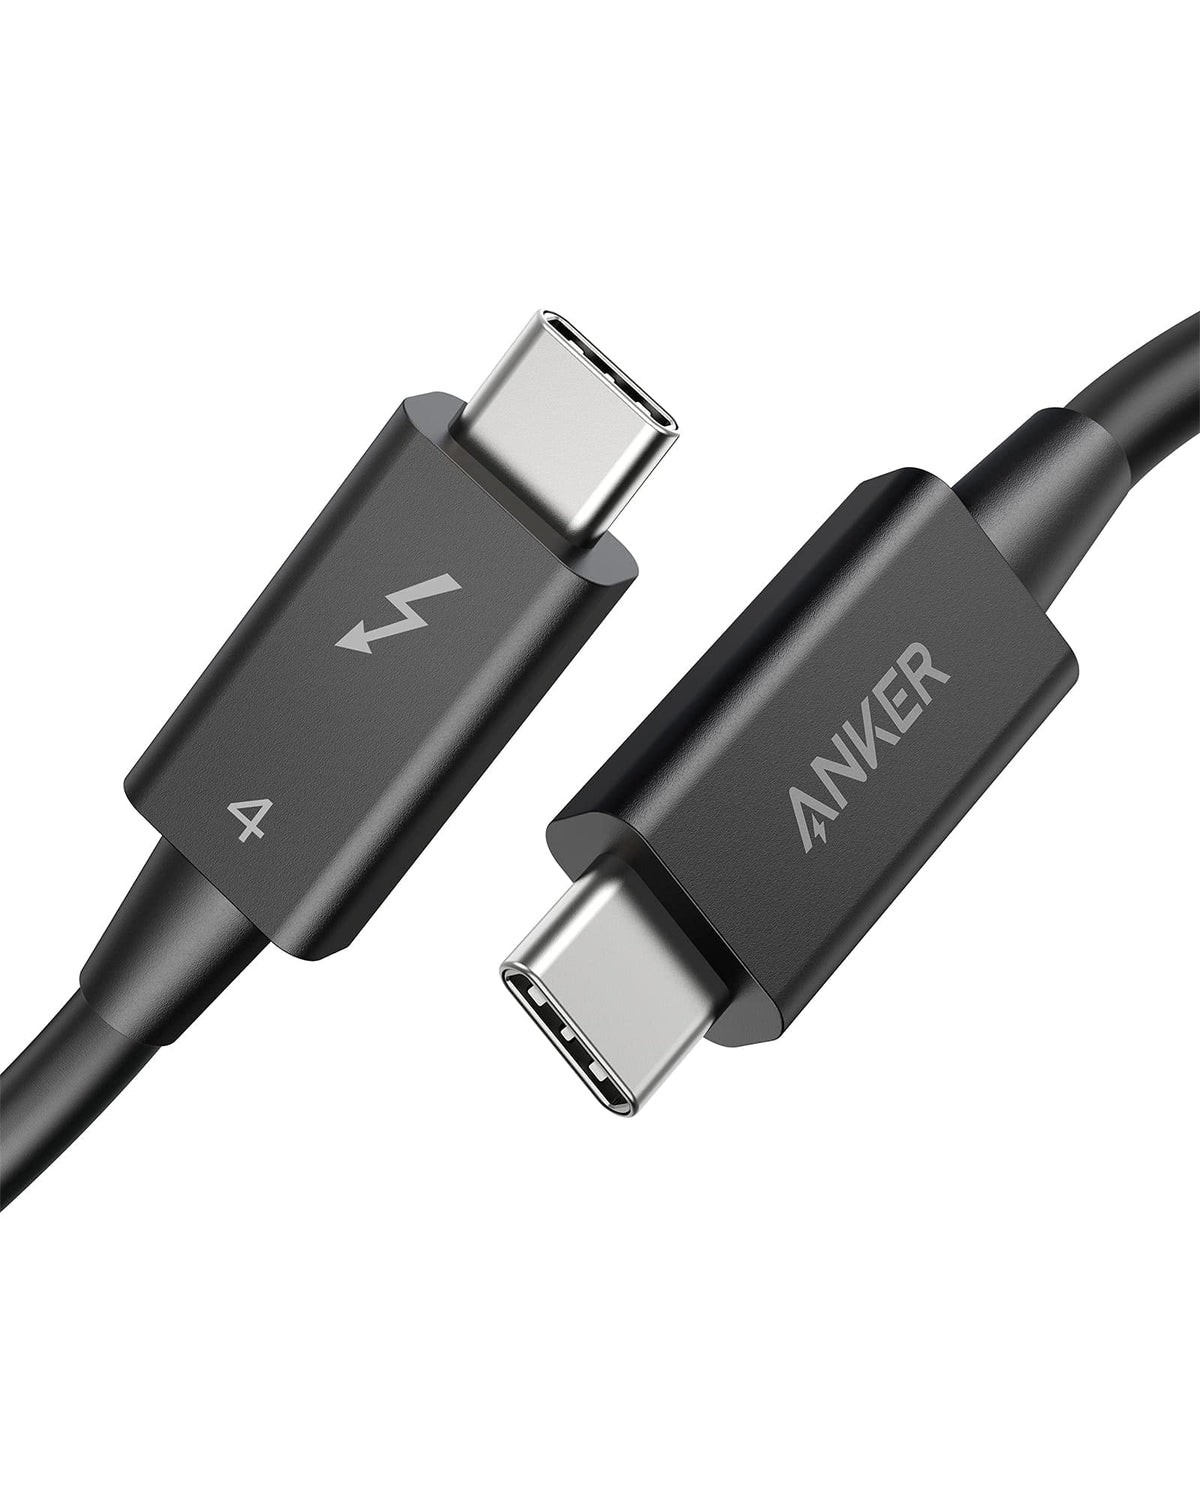 Anker Thunderbolt 4 Cable 2.3 ft